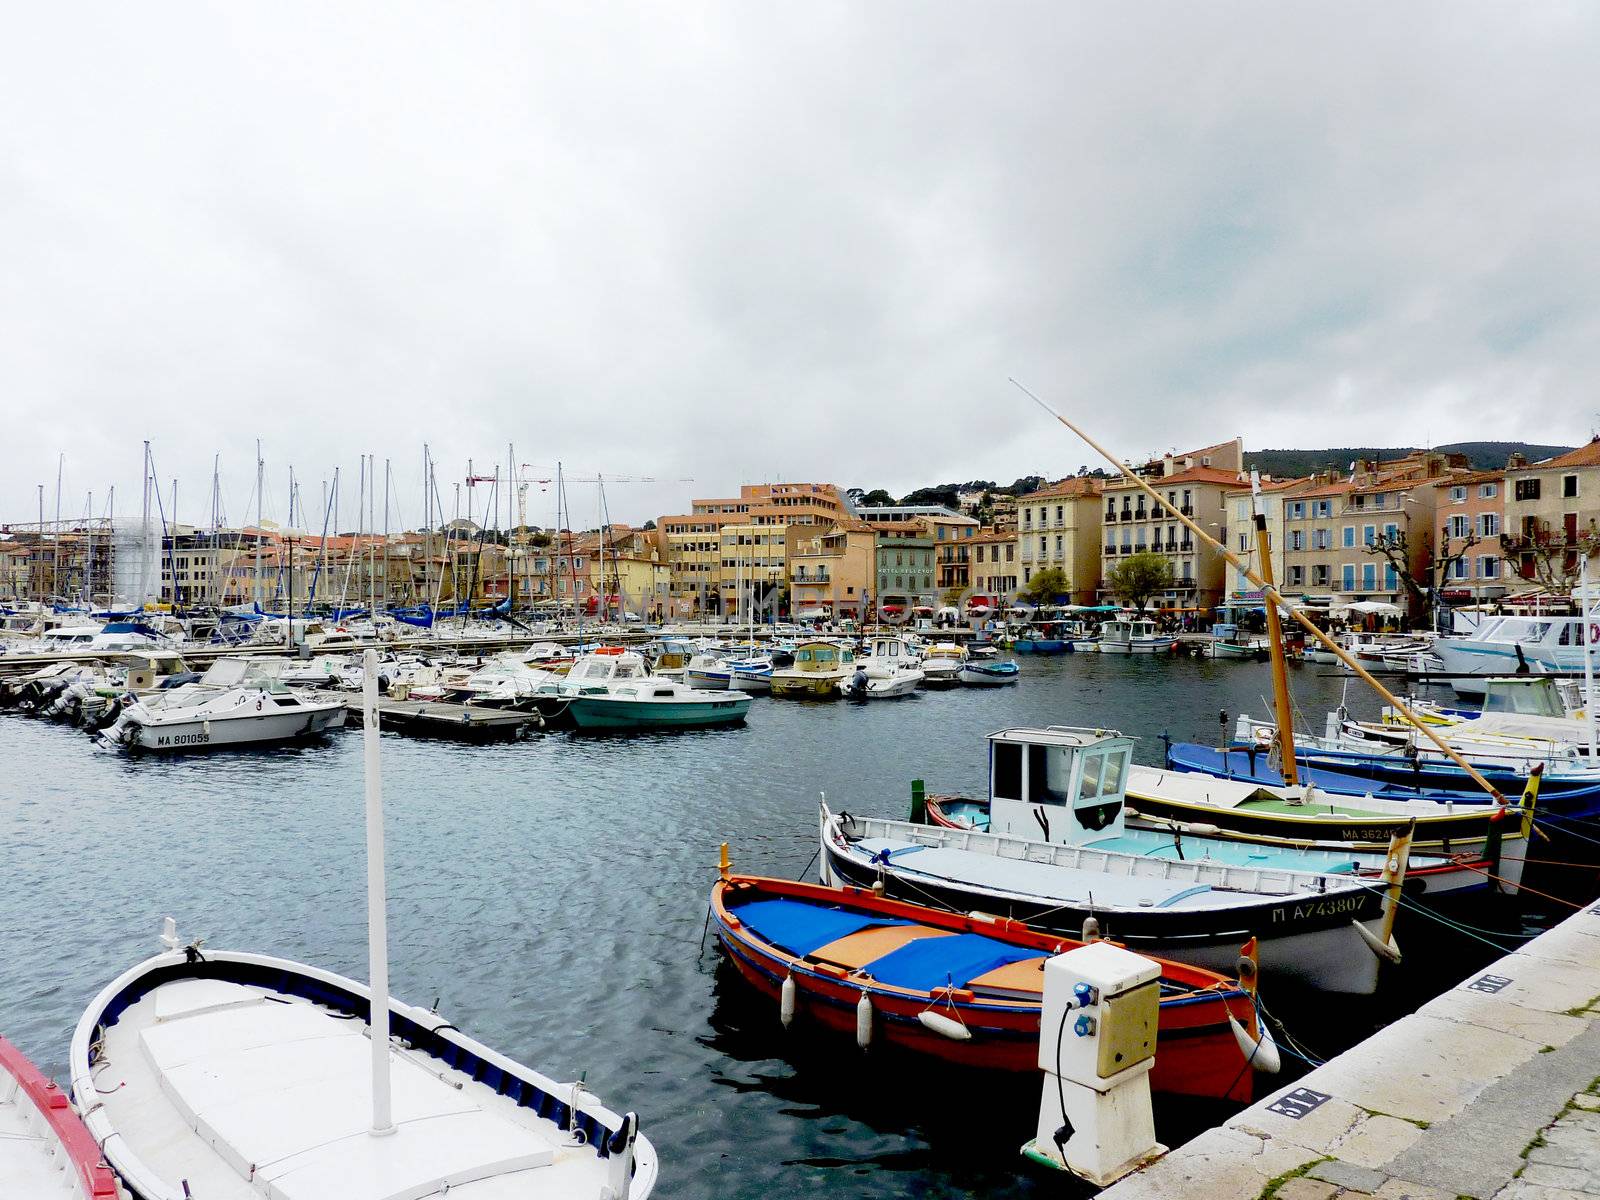 Port of La Ciotat, France, with boats and buildings by cloudy weather